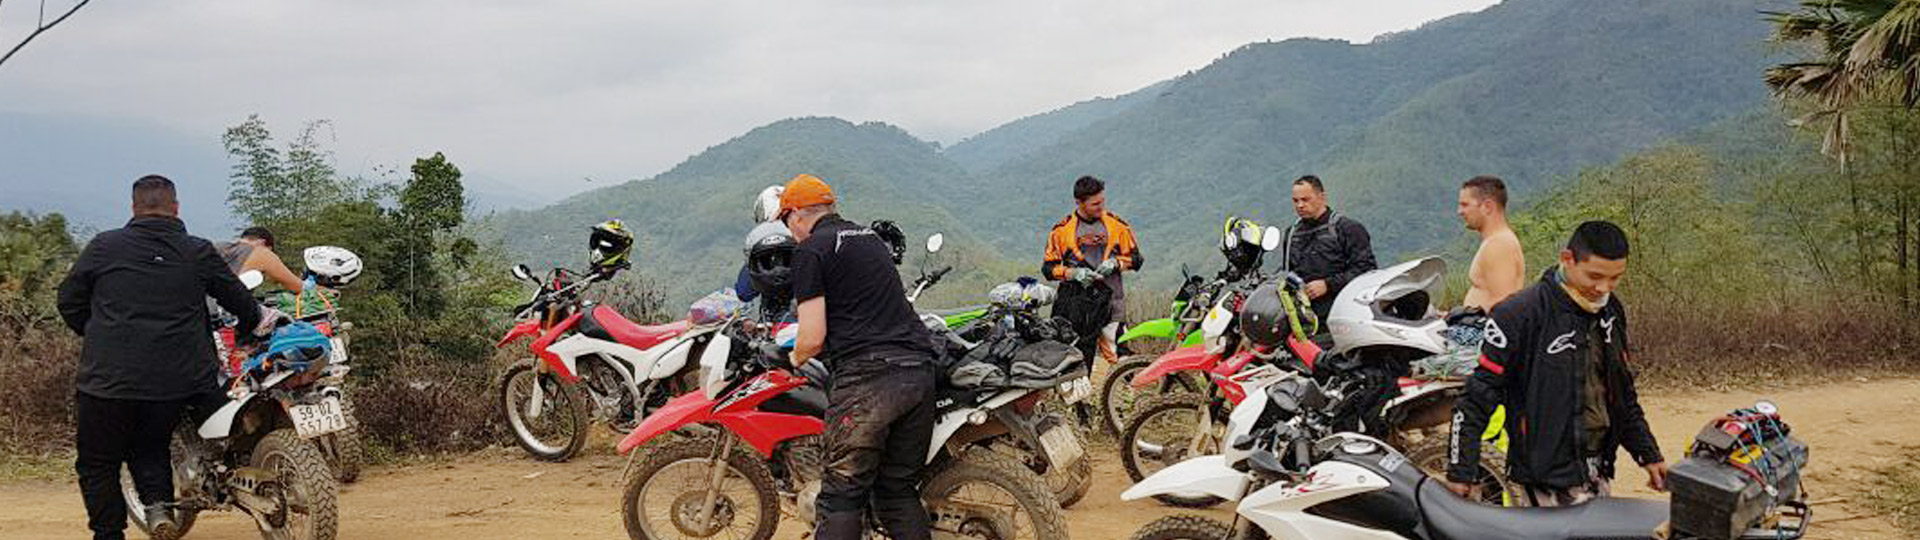 5 Days Mighty Mandalay Motorcycle Tour